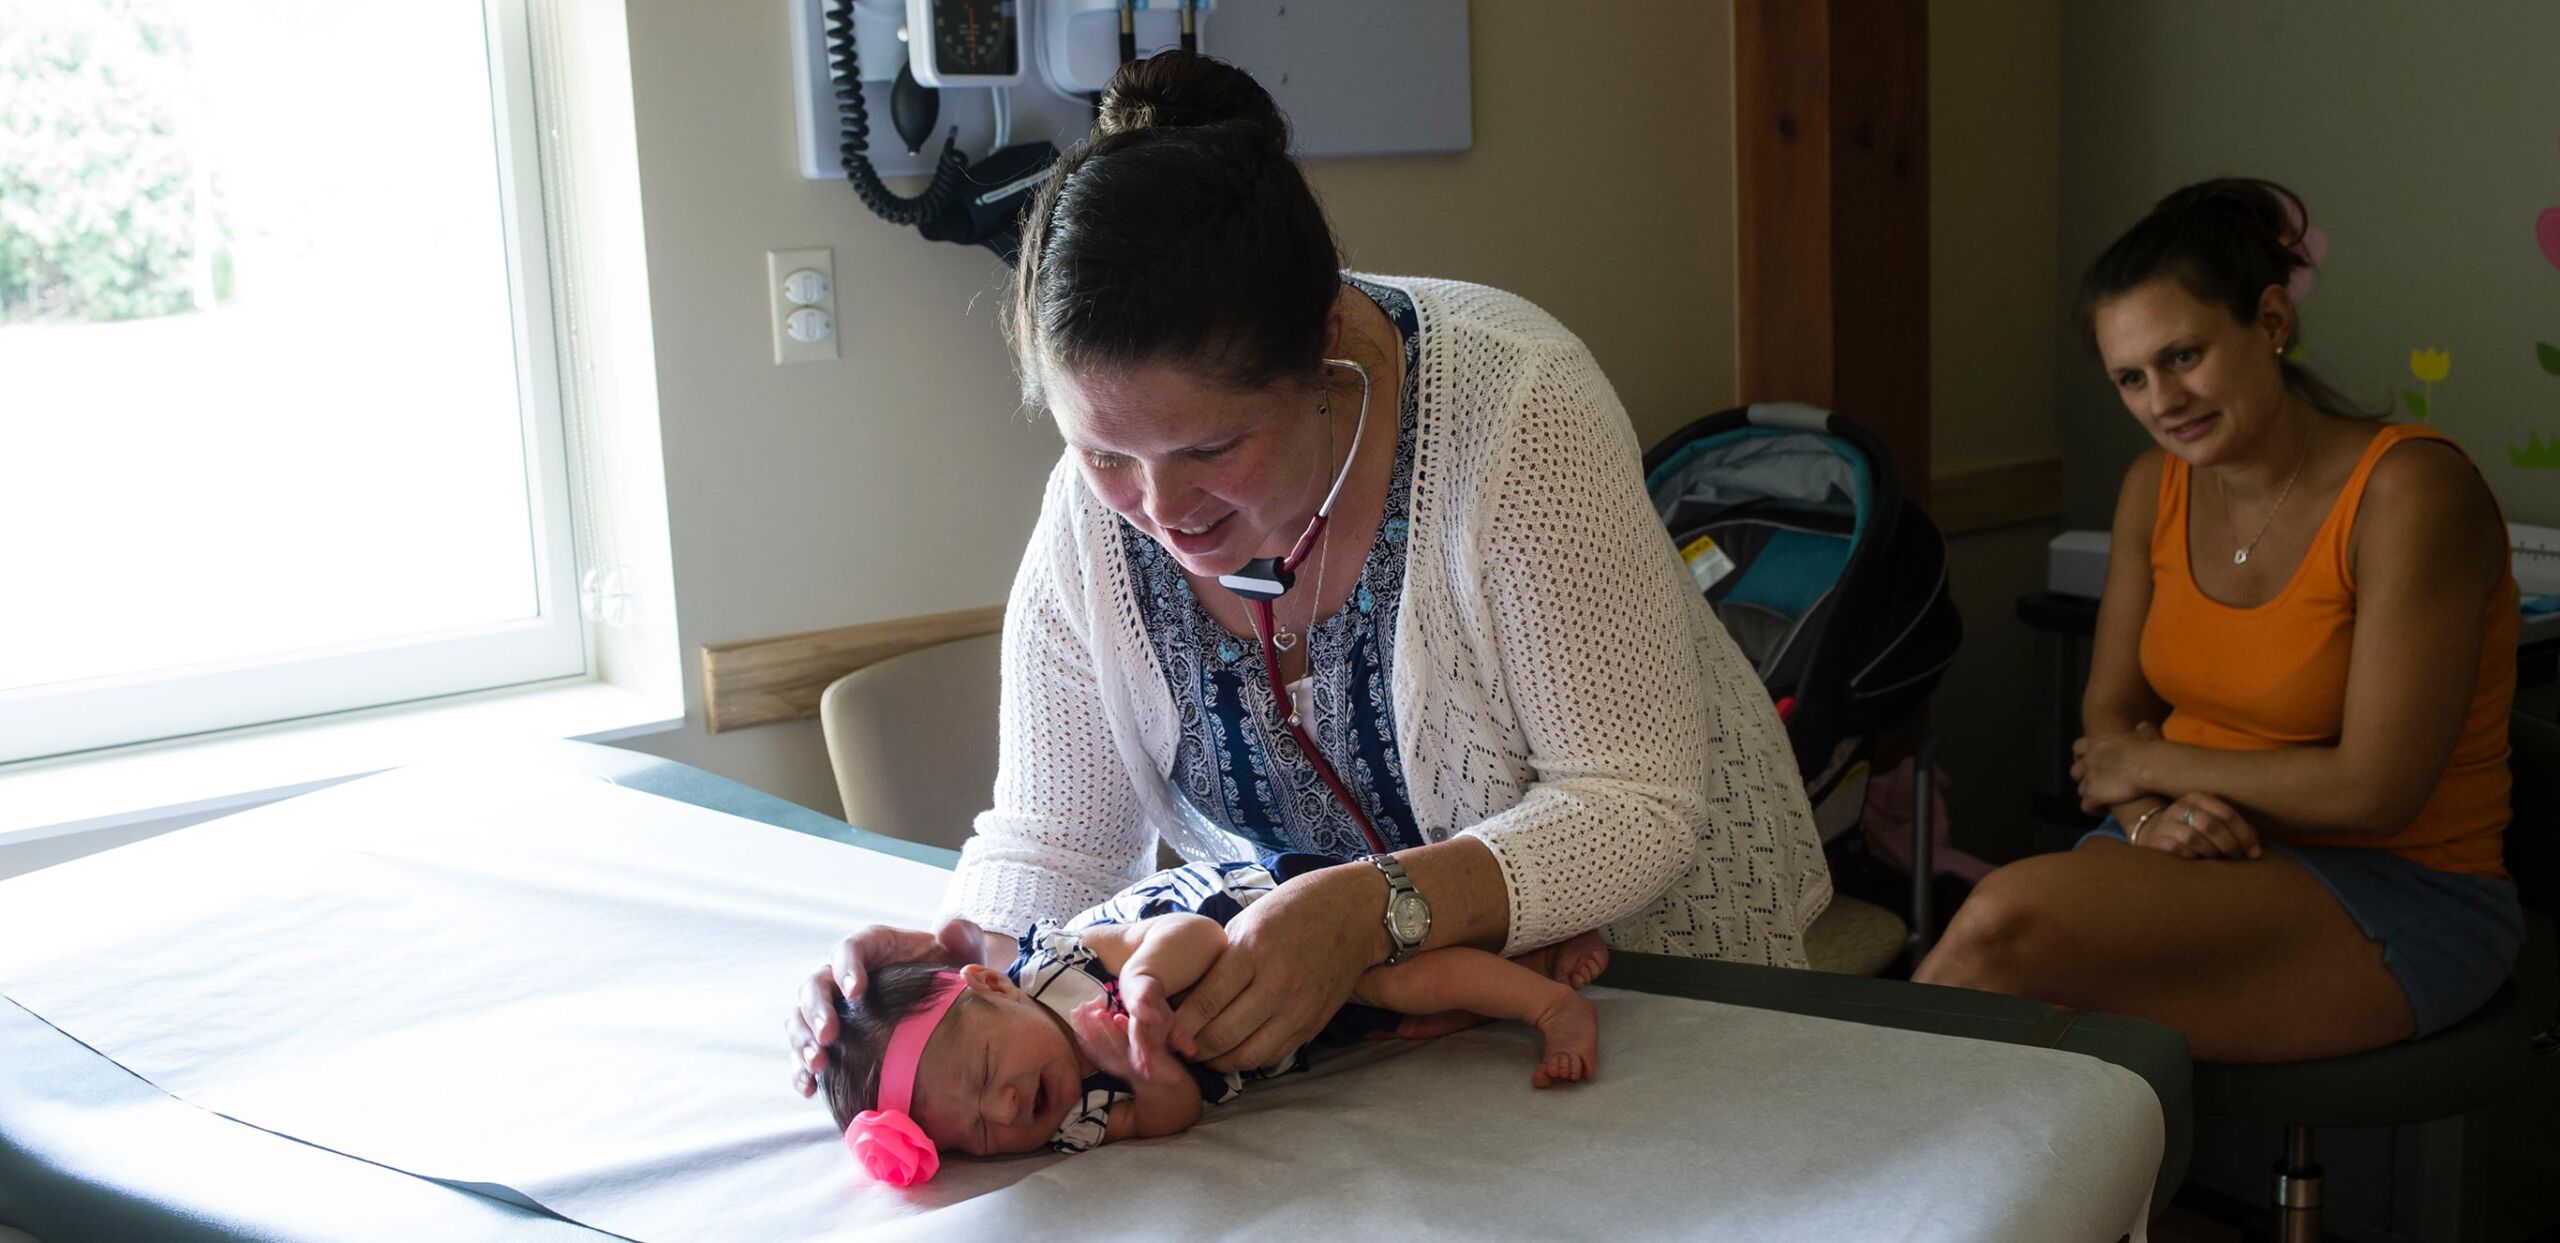 Pediatrician Jennifer Schott, MD, examines a newborn baby while mother watches at Sugarloaf Pediatrics, South Deerfield, MA 01373.